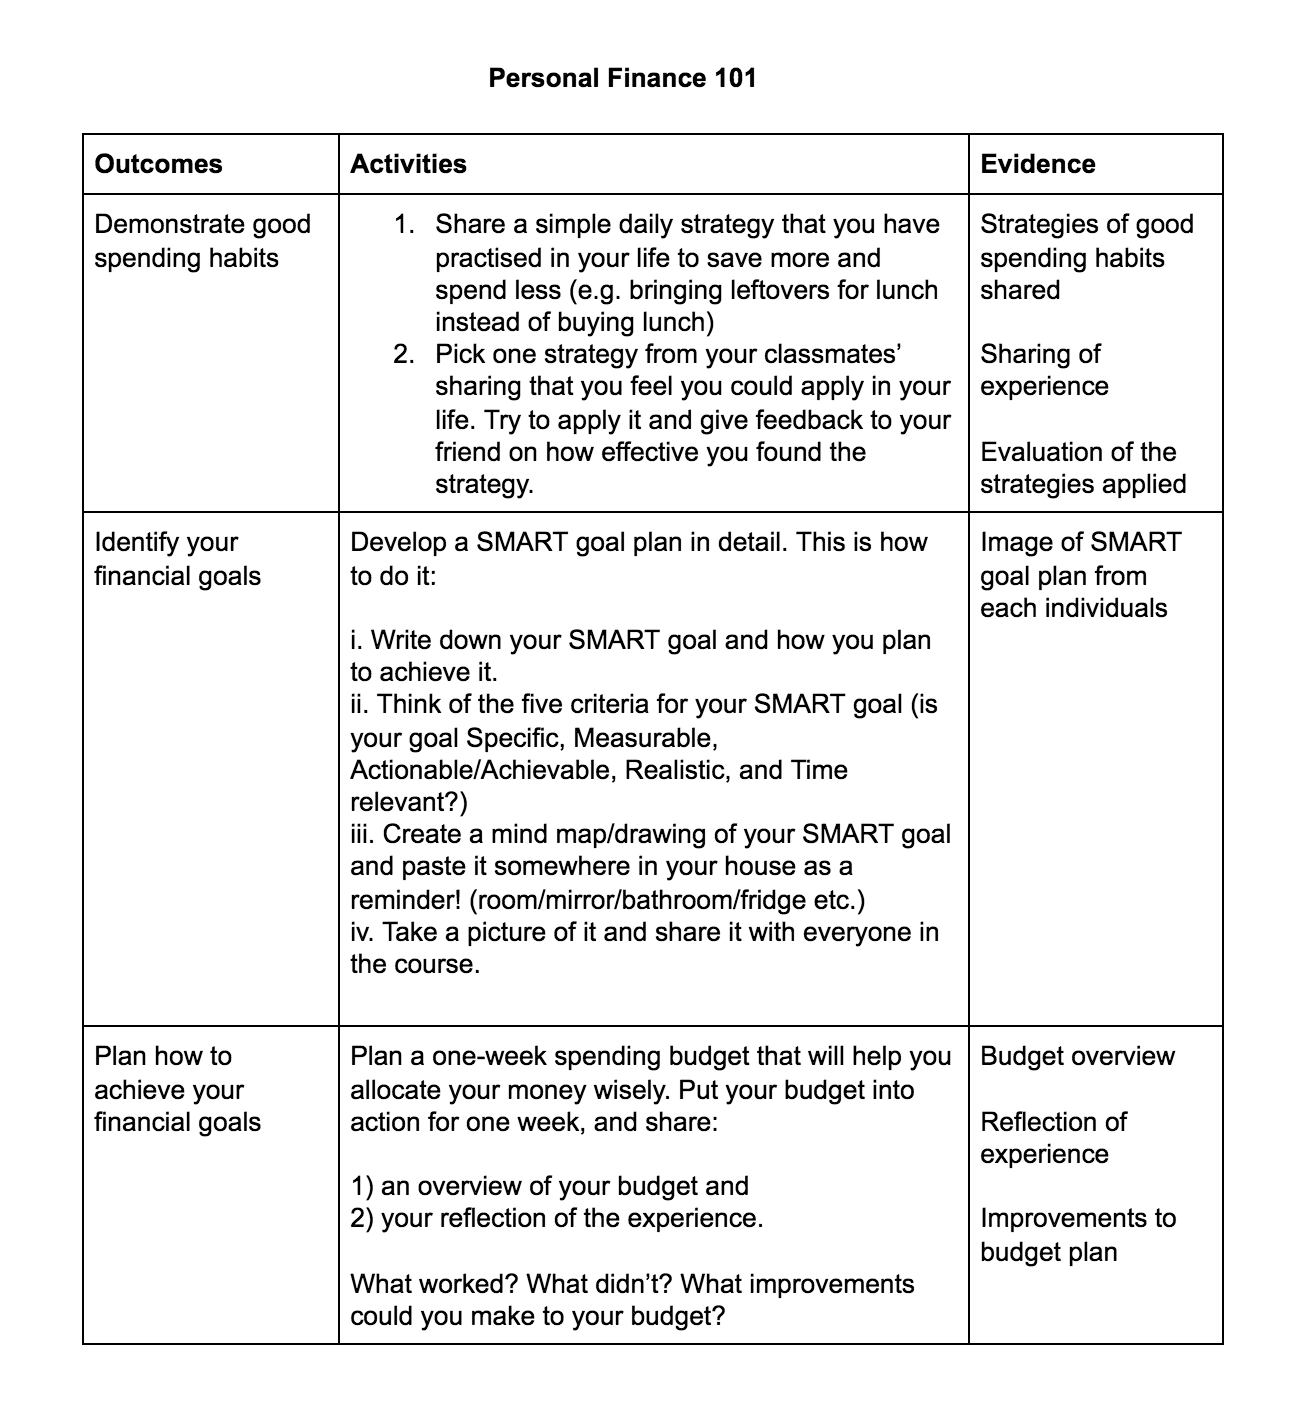 Course plan for a course entitled "Personal Finance 101". The table is divided into three columns, which are outcomes, activities, and evidence.